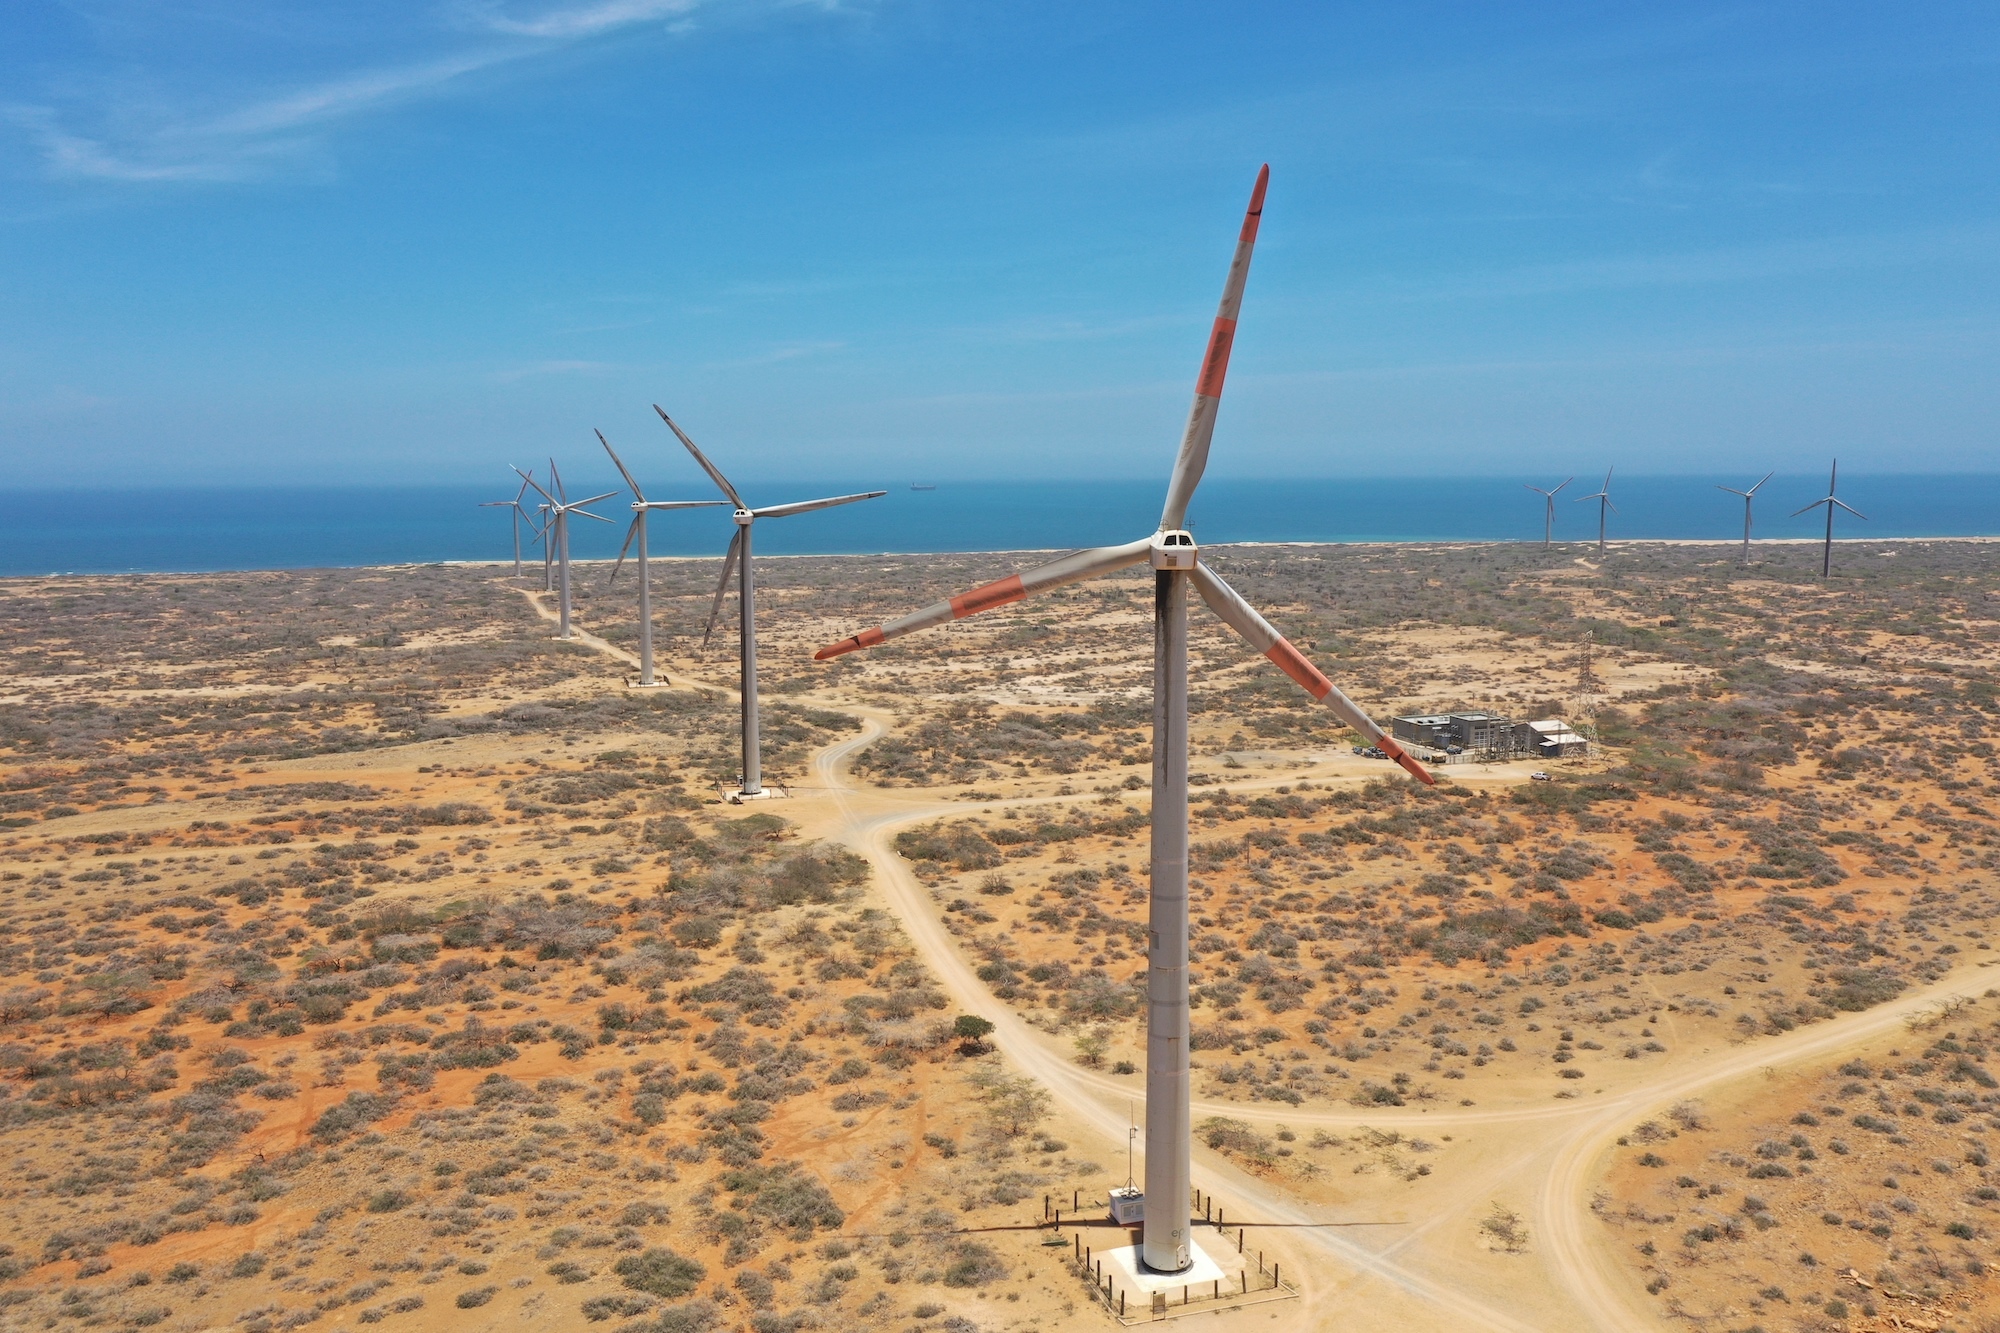 Brazil is the biggest wind energy producer in Latin America